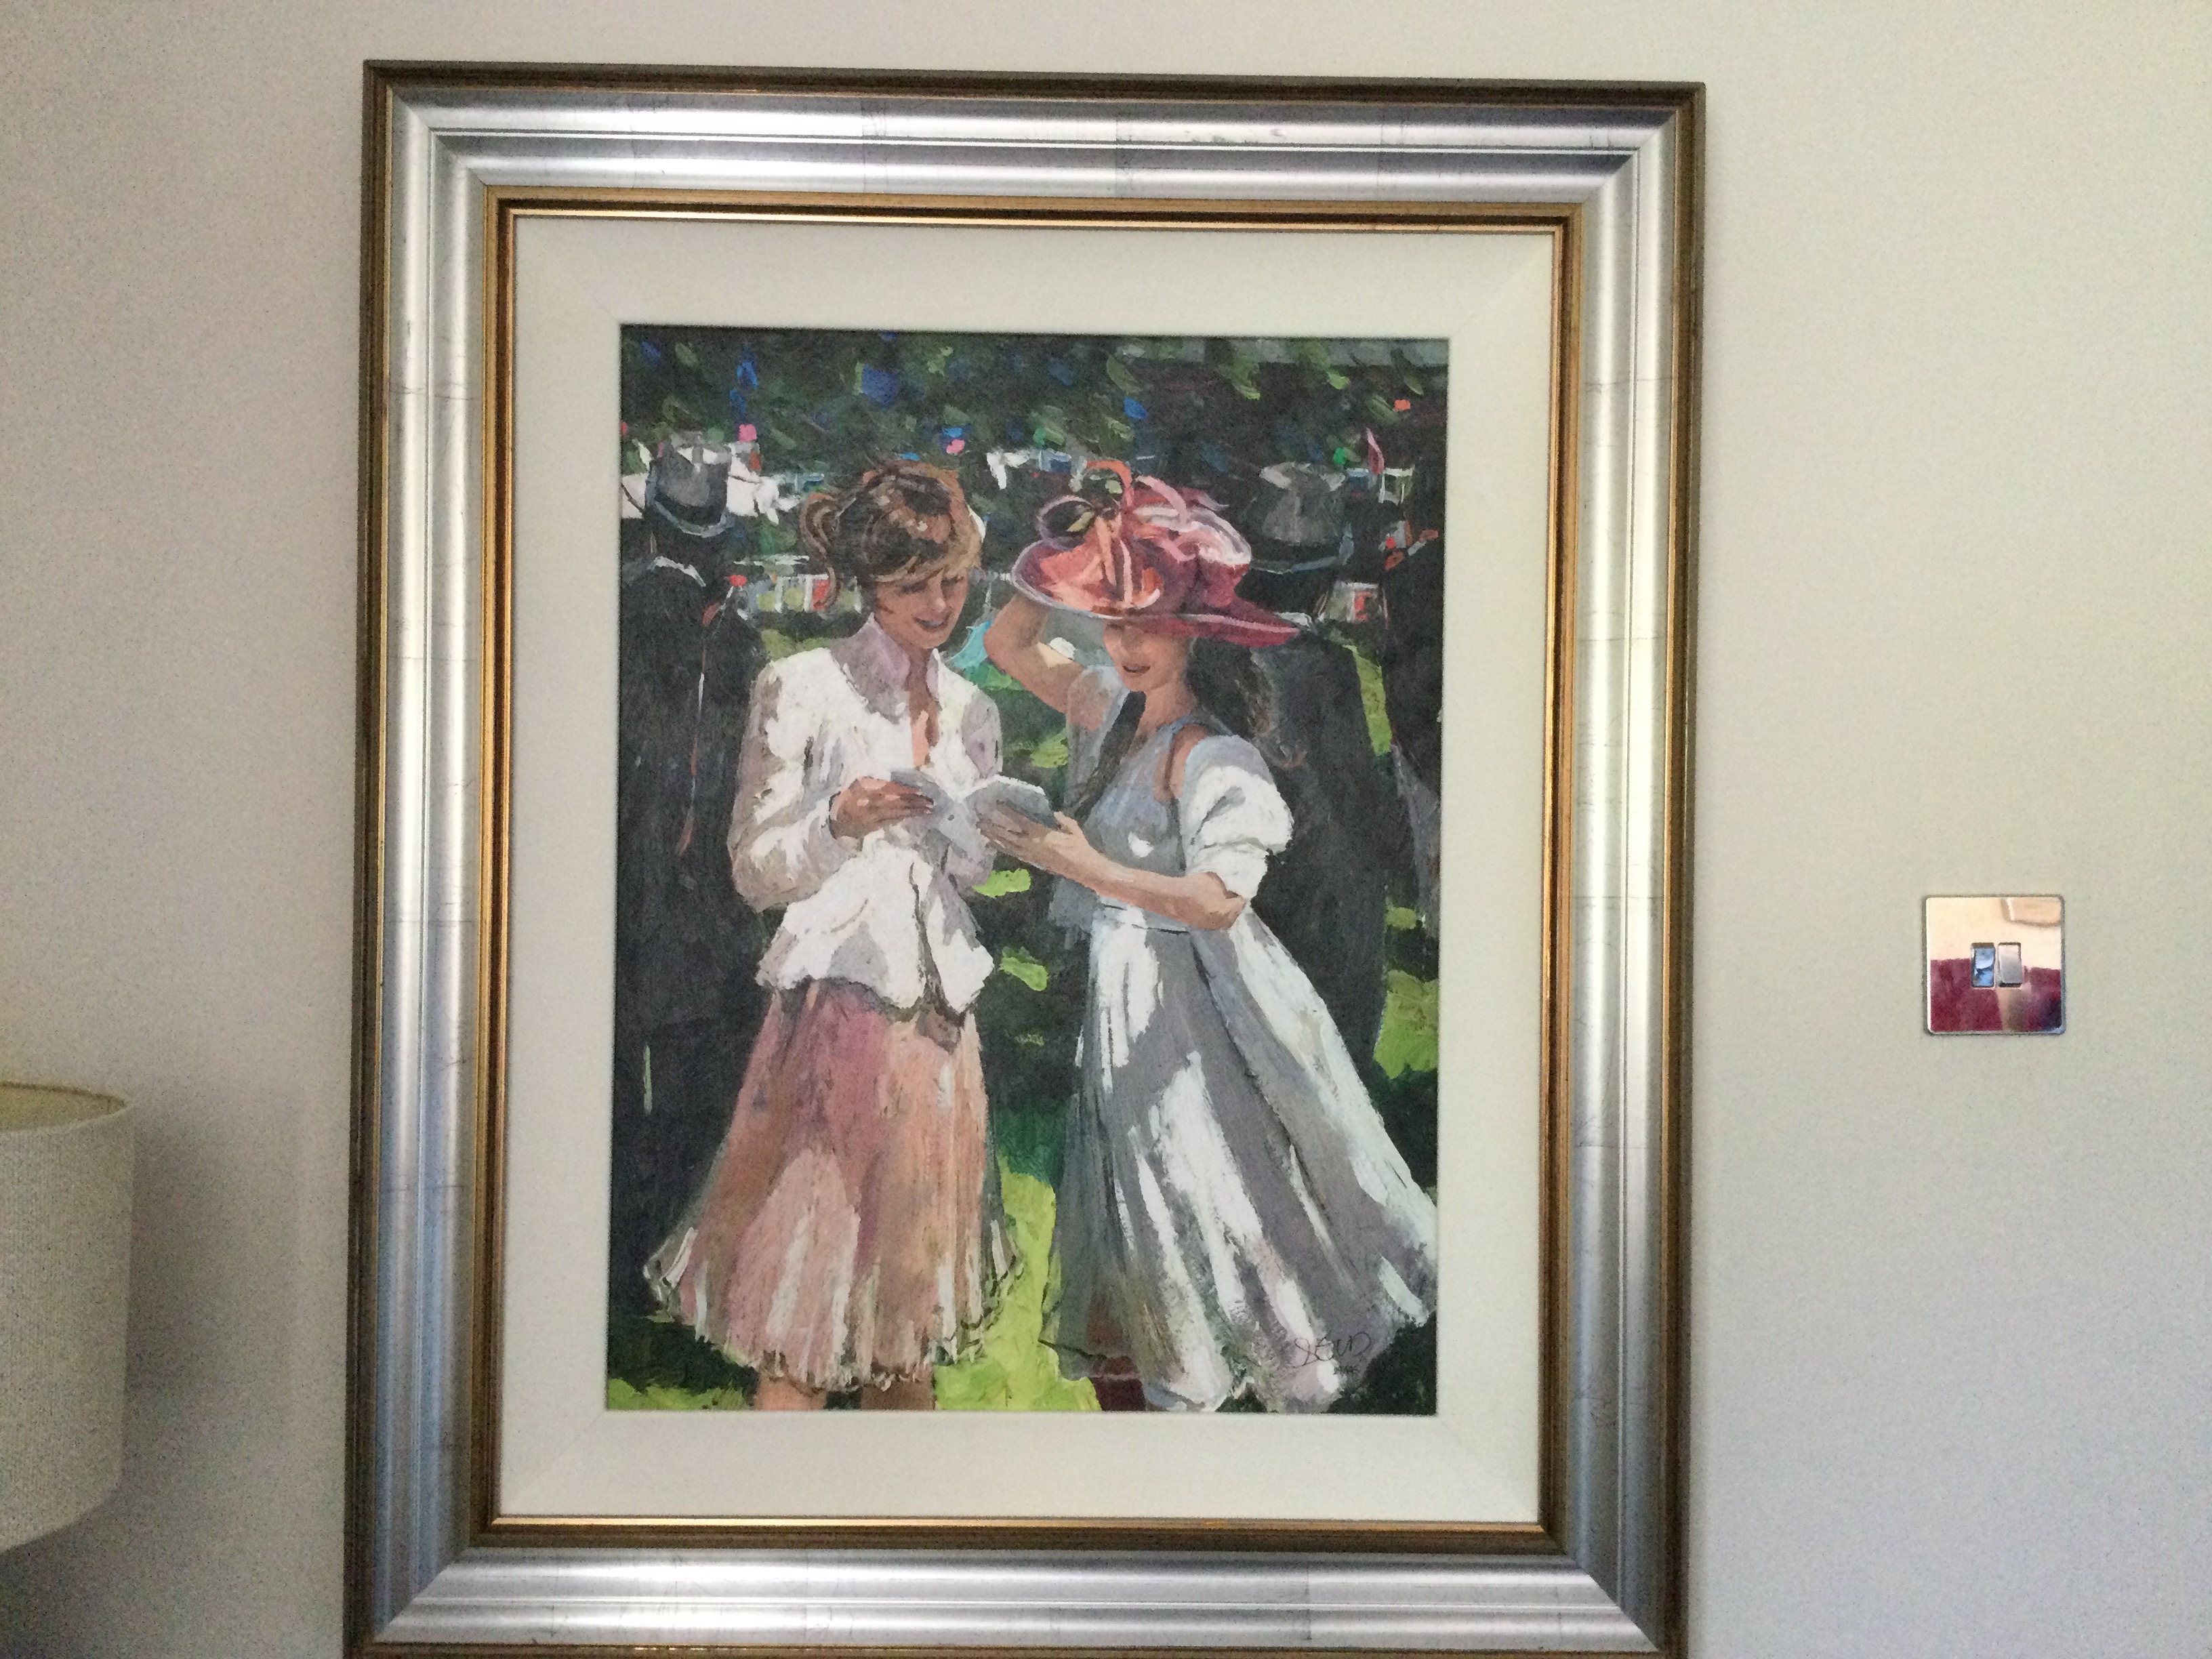 “Royal Ascot Ladies Day” by Sherree Valentine Daines 